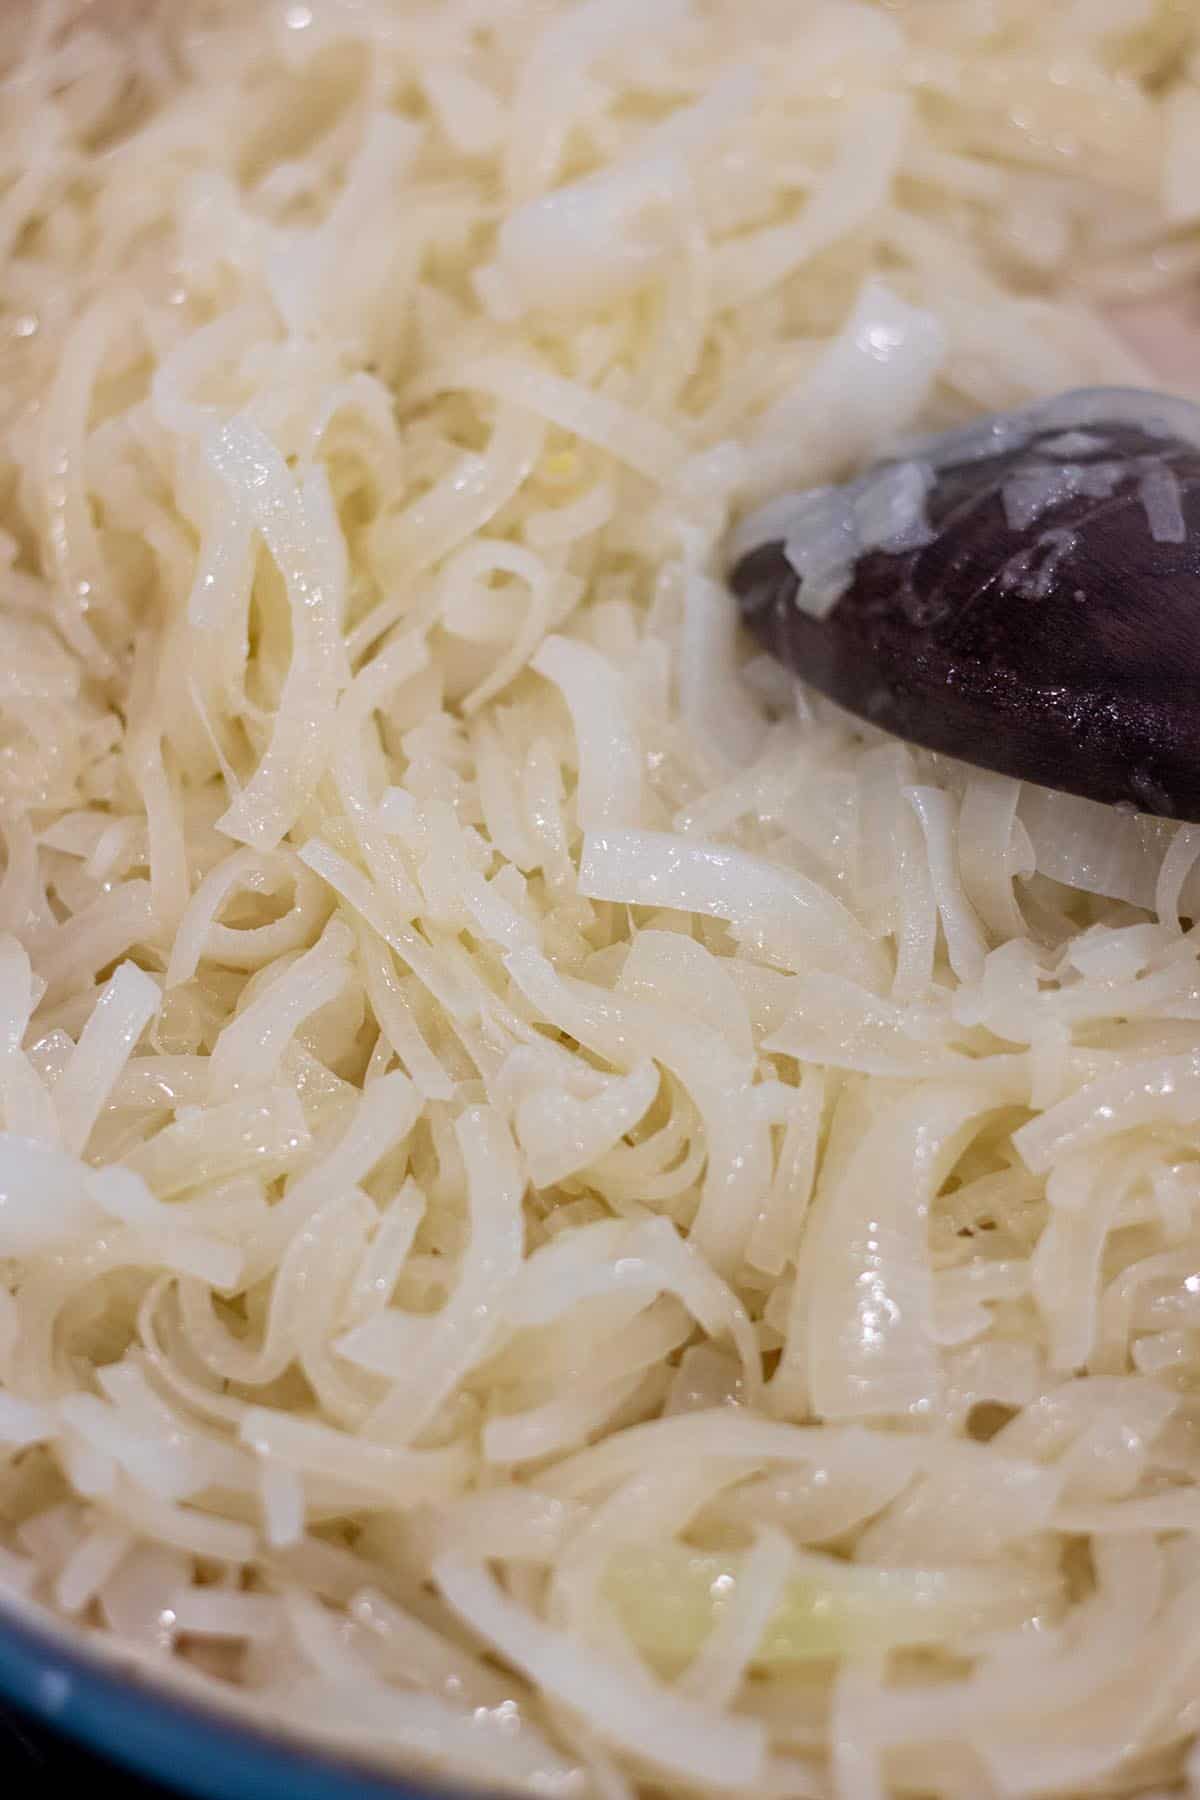 Sautéed onions that are silky looking with a wooden spoon.